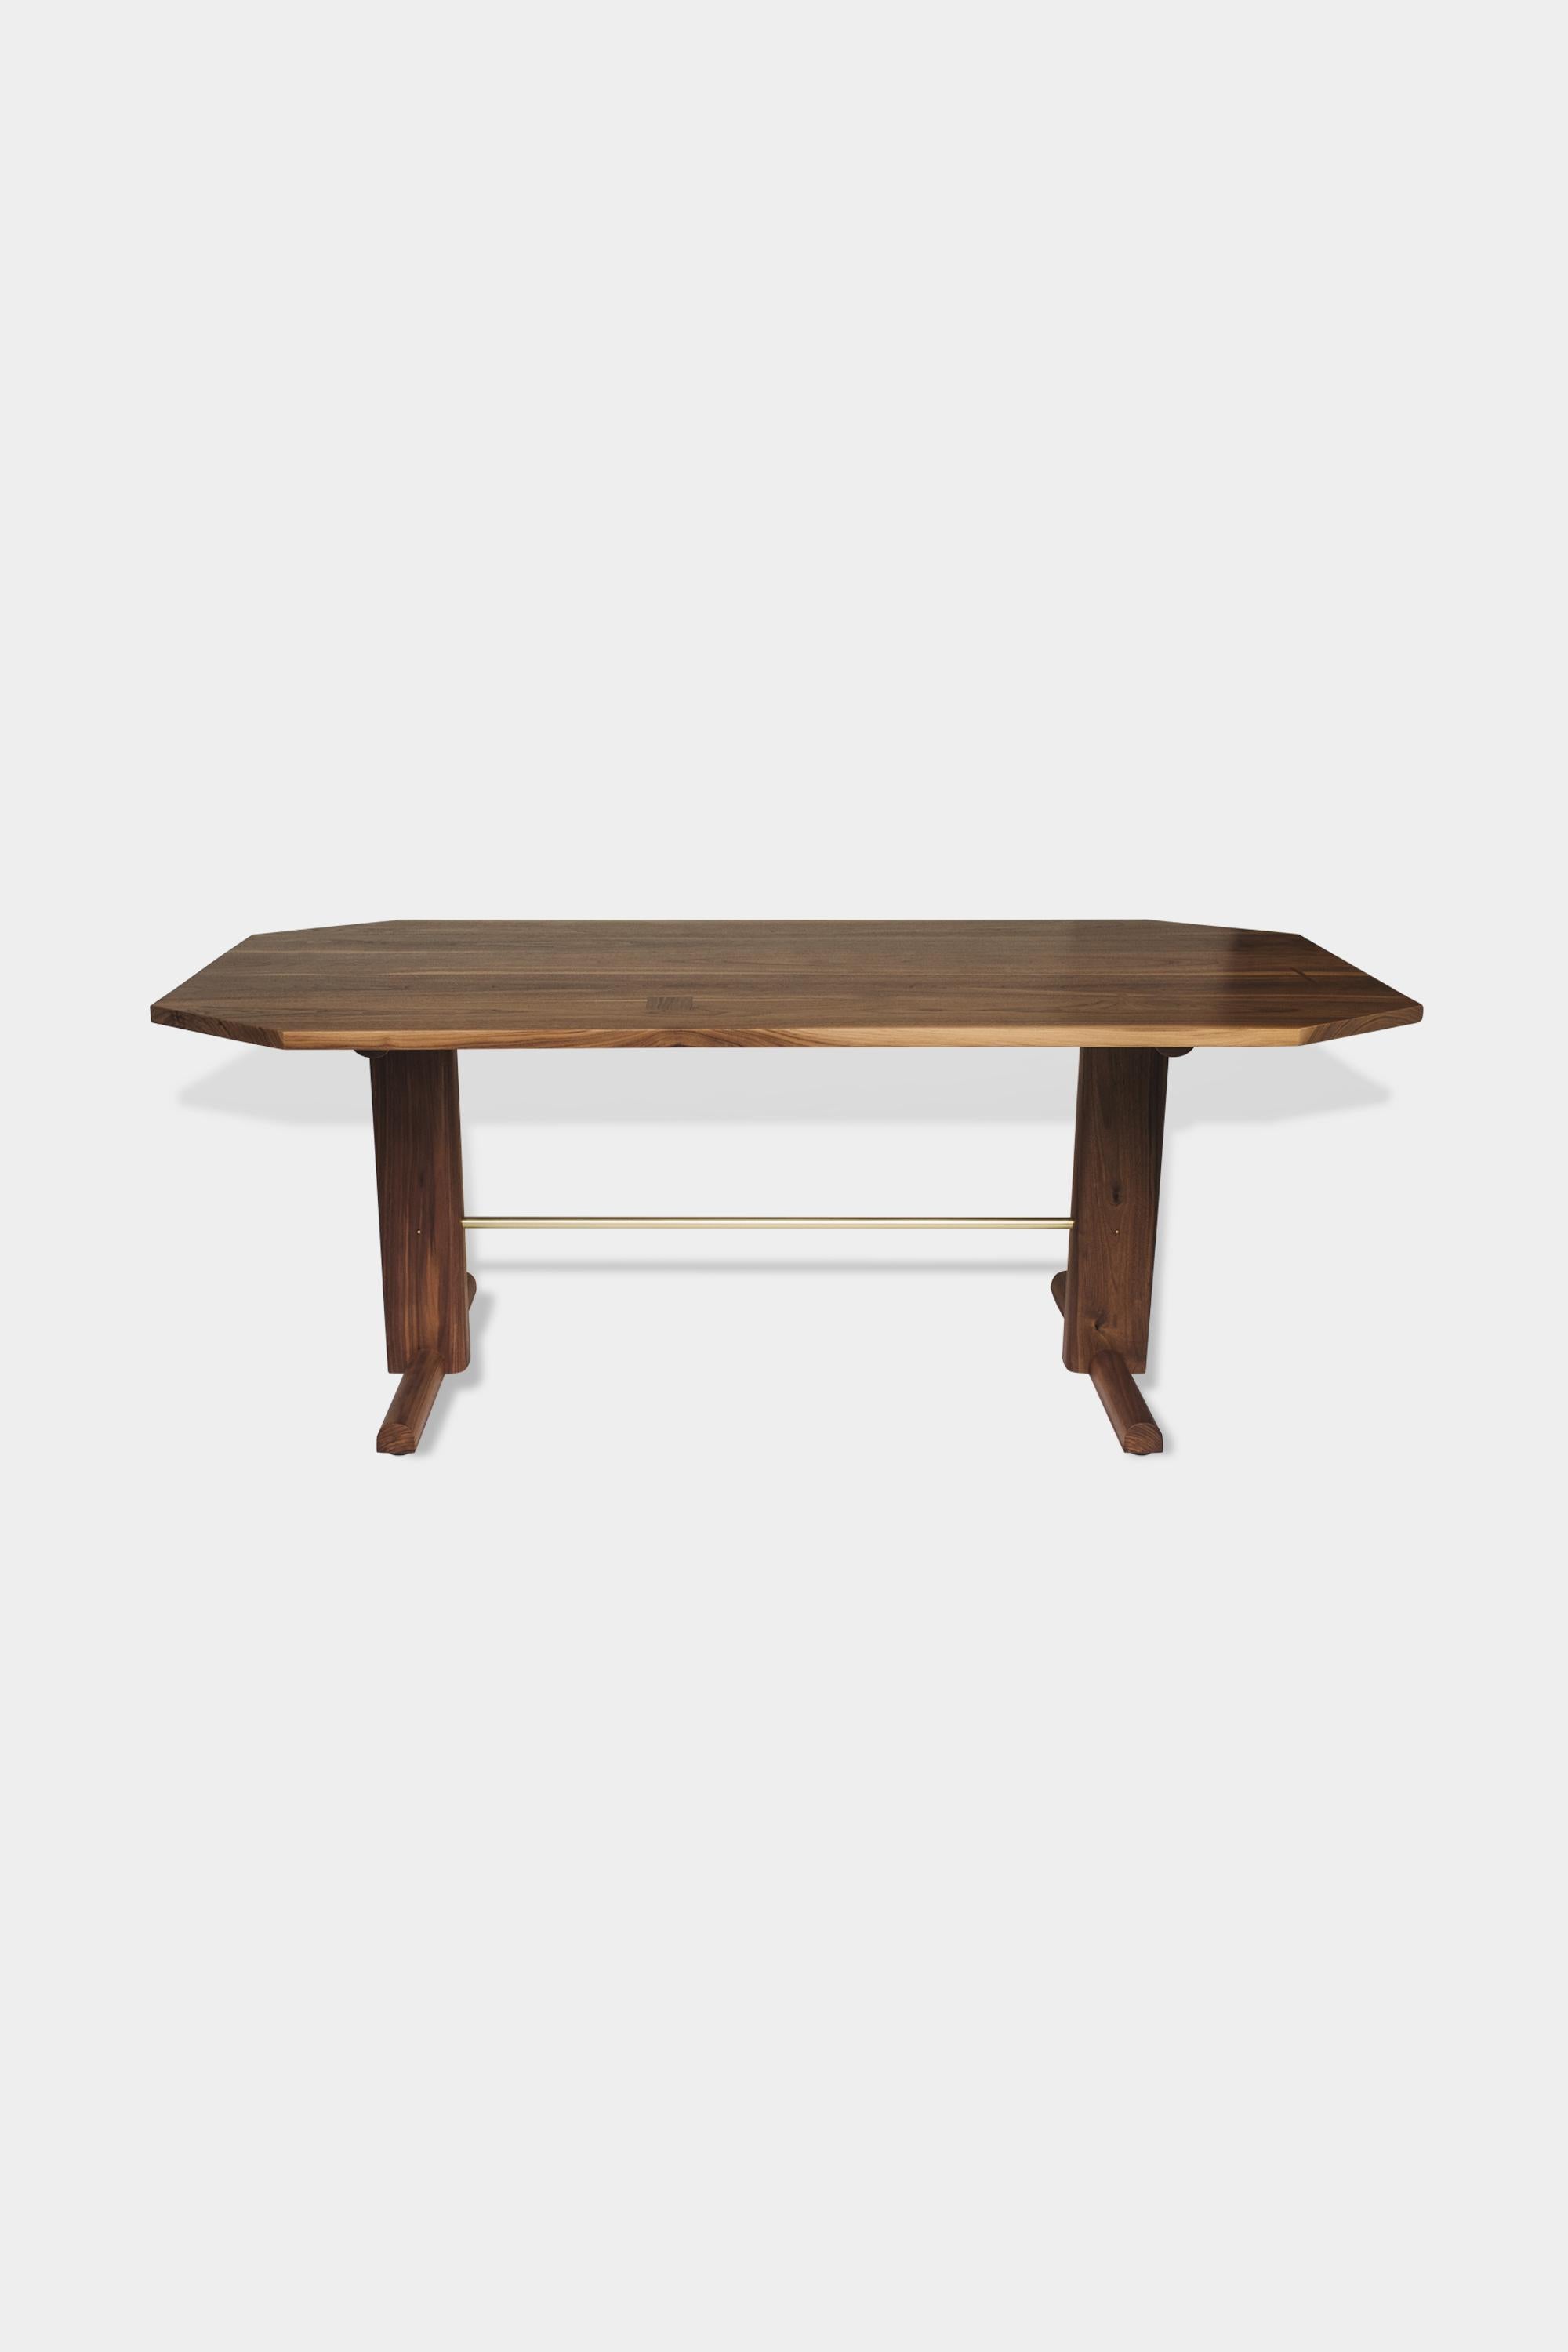 Wood Clipped Corner BRIG Dining Table in Walnut For Sale